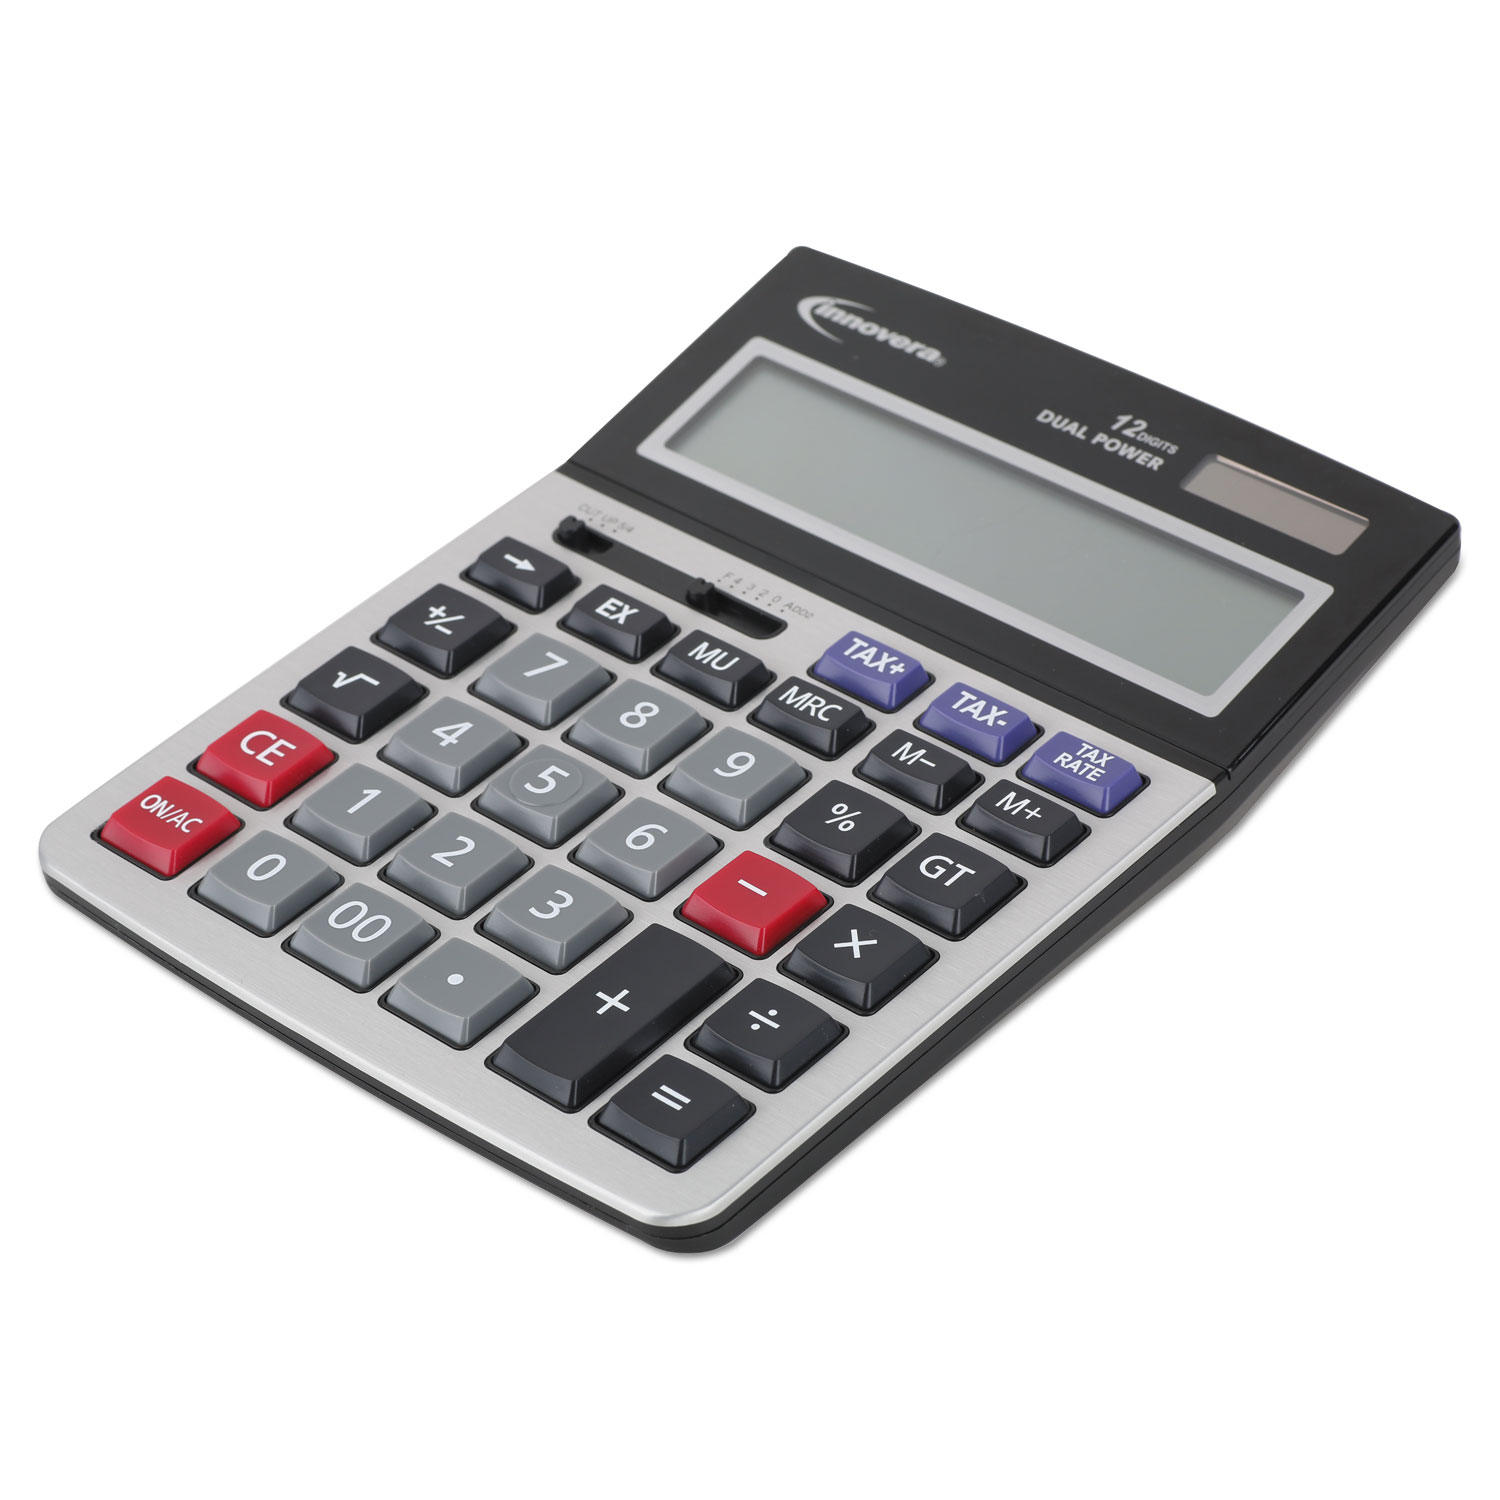 15975 Large Digit Commercial Calculator, 12-Digit LCD